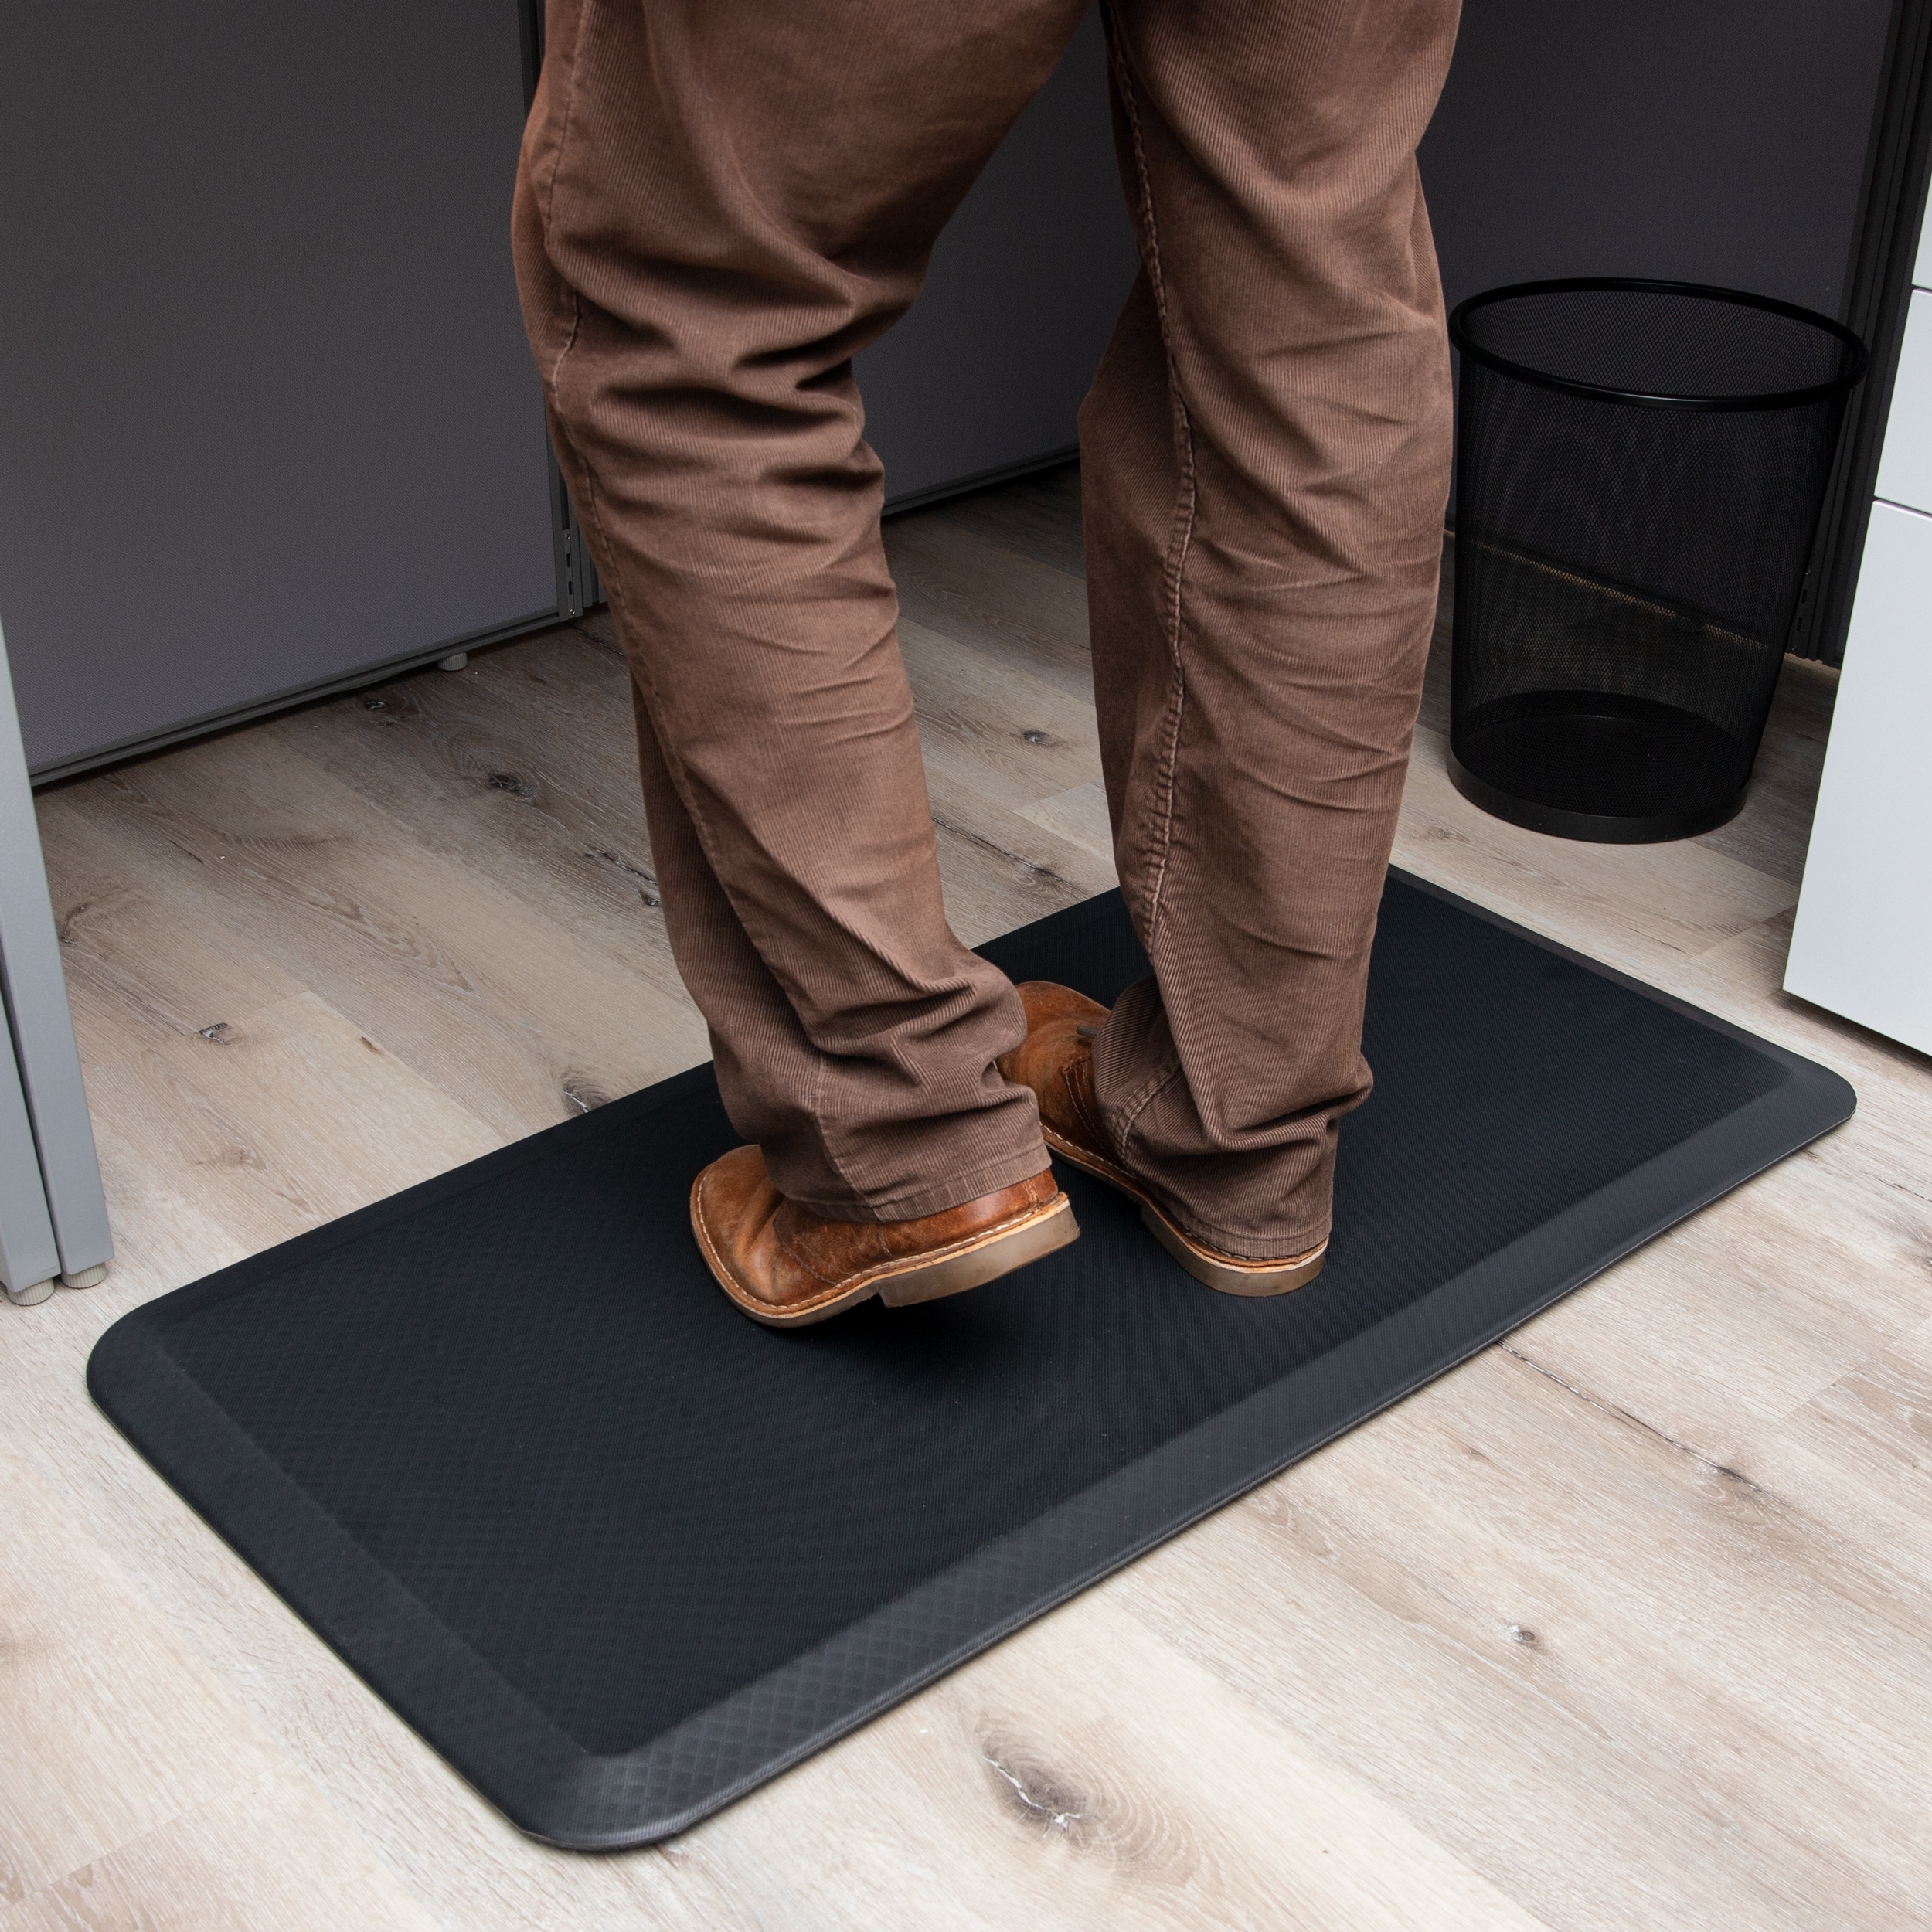 https://ak1.ostkcdn.com/images/products/is/images/direct/c5efccd2bdba8996c9ff37ef1bc71174c5b005e8/Mind-Reader-9-to-5-Collection%2C-Anti-Fatigue-Mat-for-Kitchen-and-Office%2C-Waterproof%2C-Standing-Desk-Mat%2C-Black.jpg